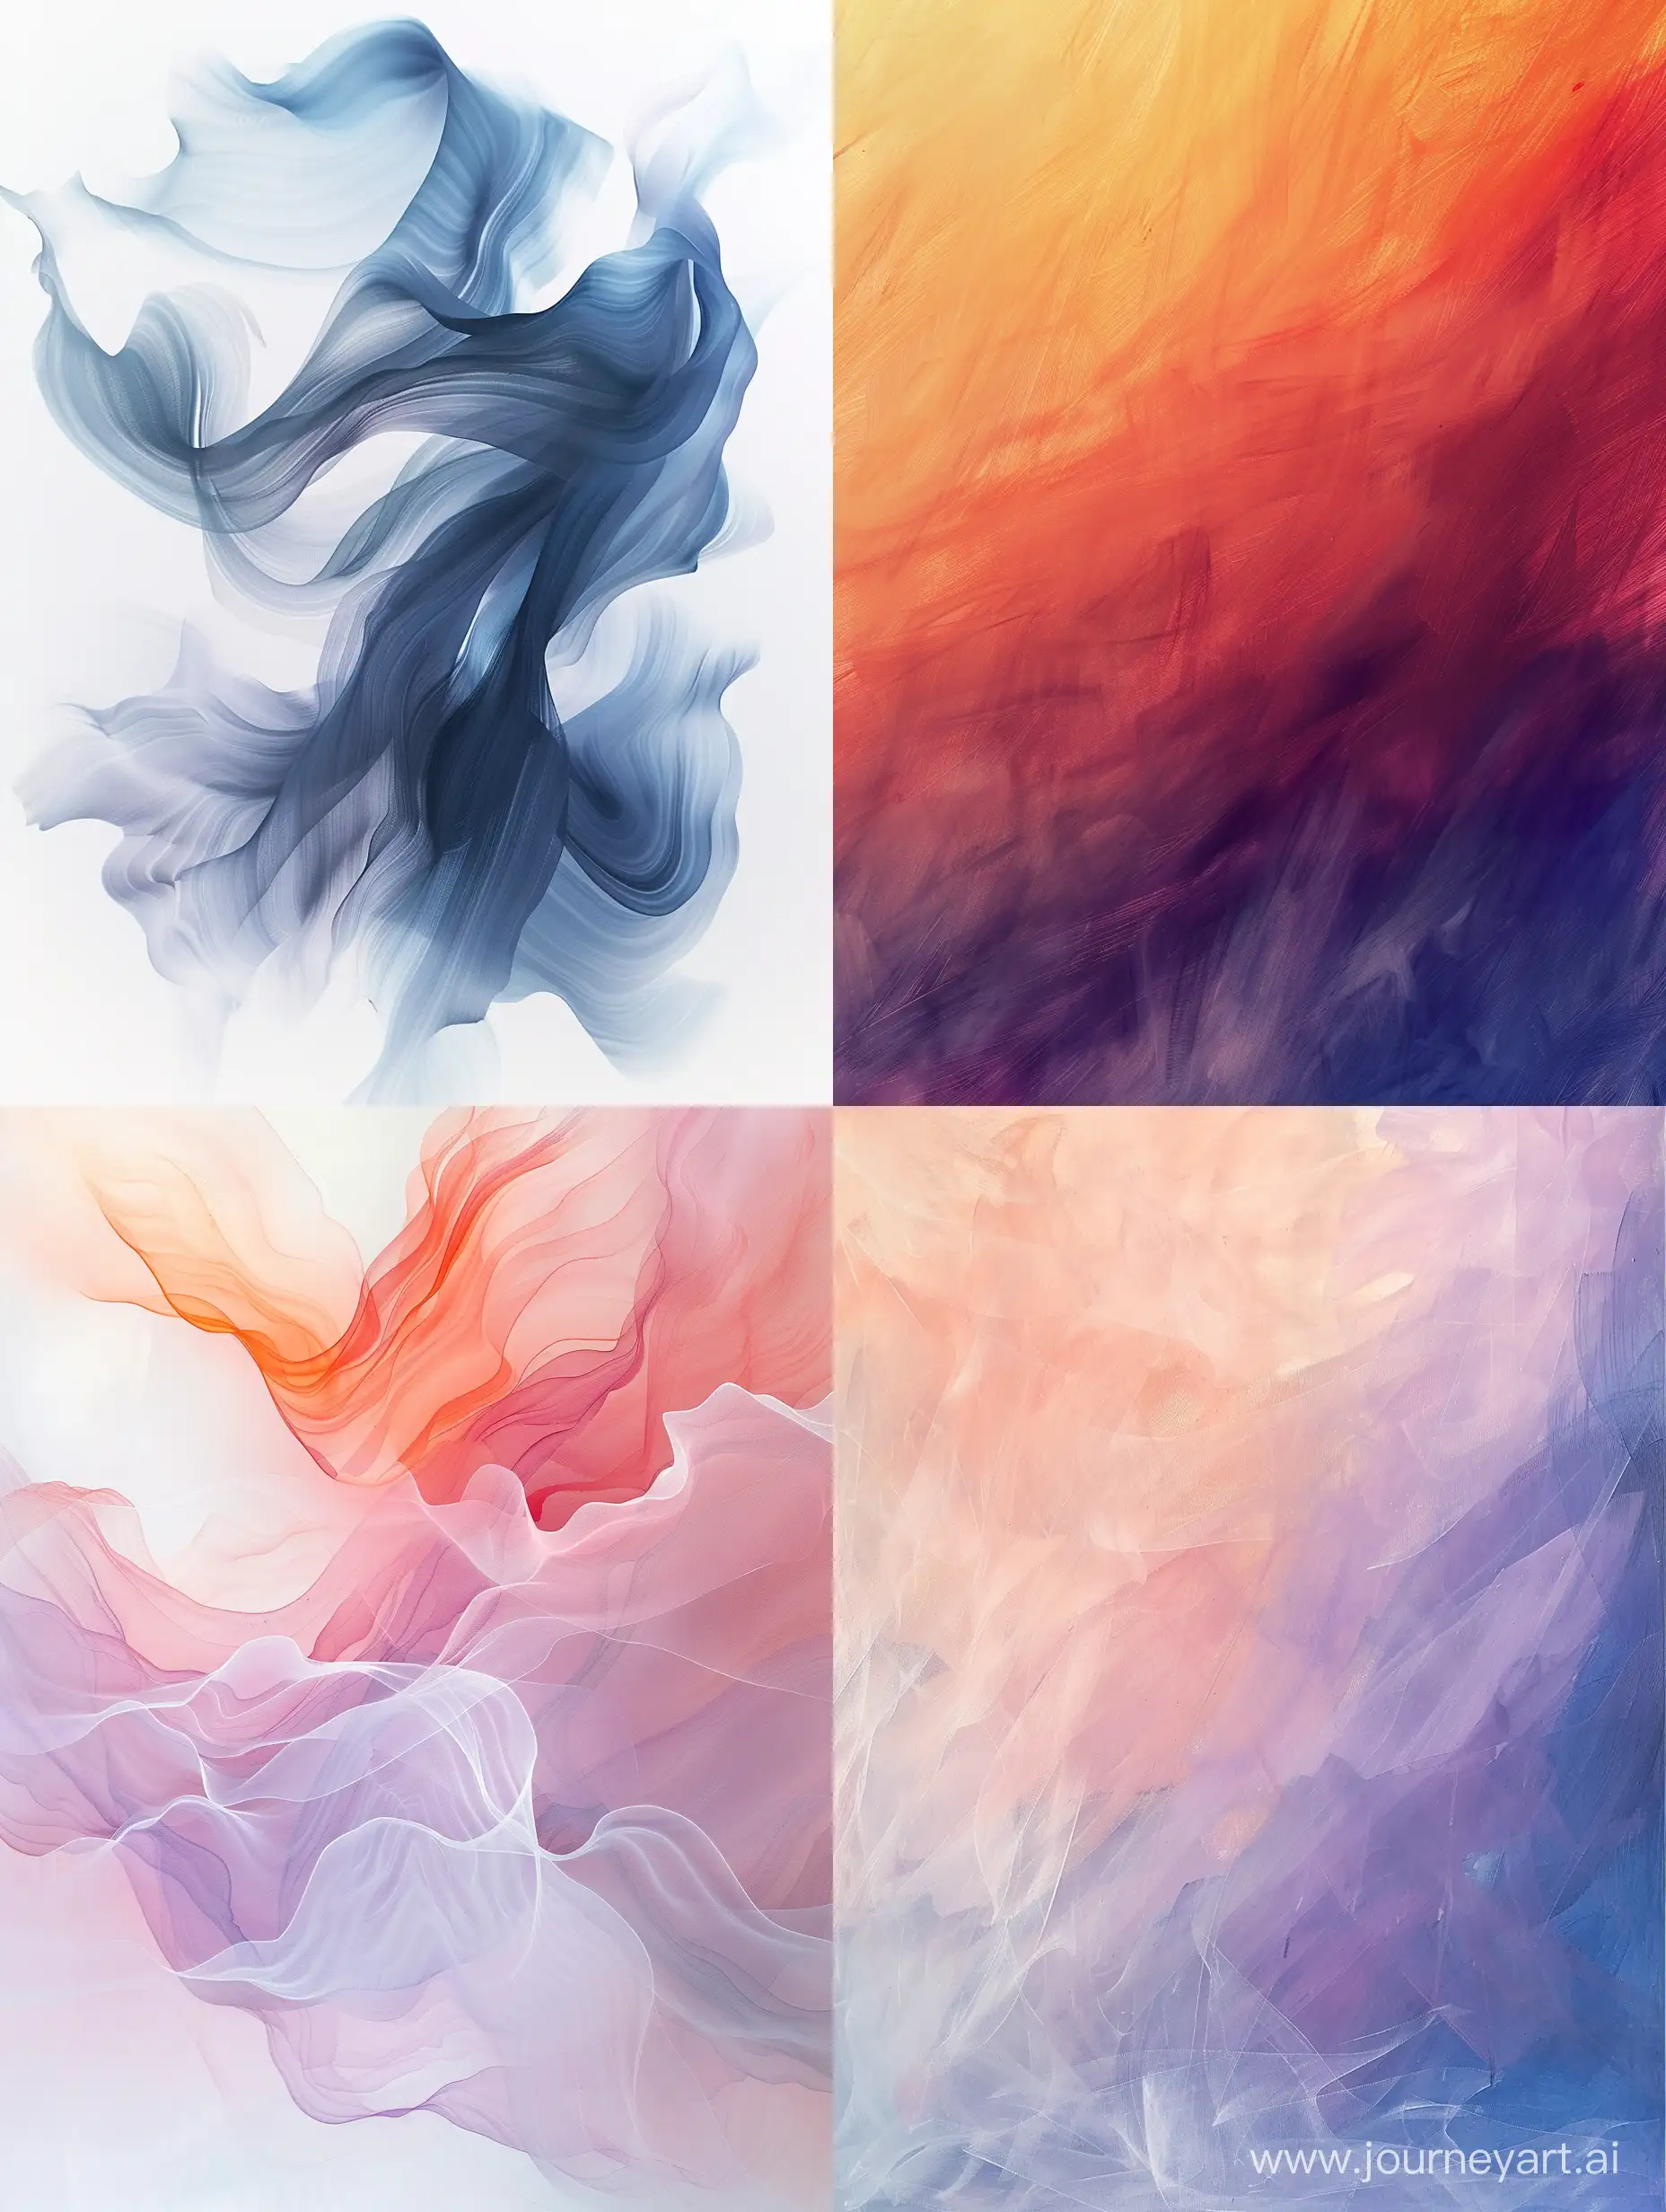 Minimalist-Abstract-Wind-Movement-Painting-with-Subtle-Gradients